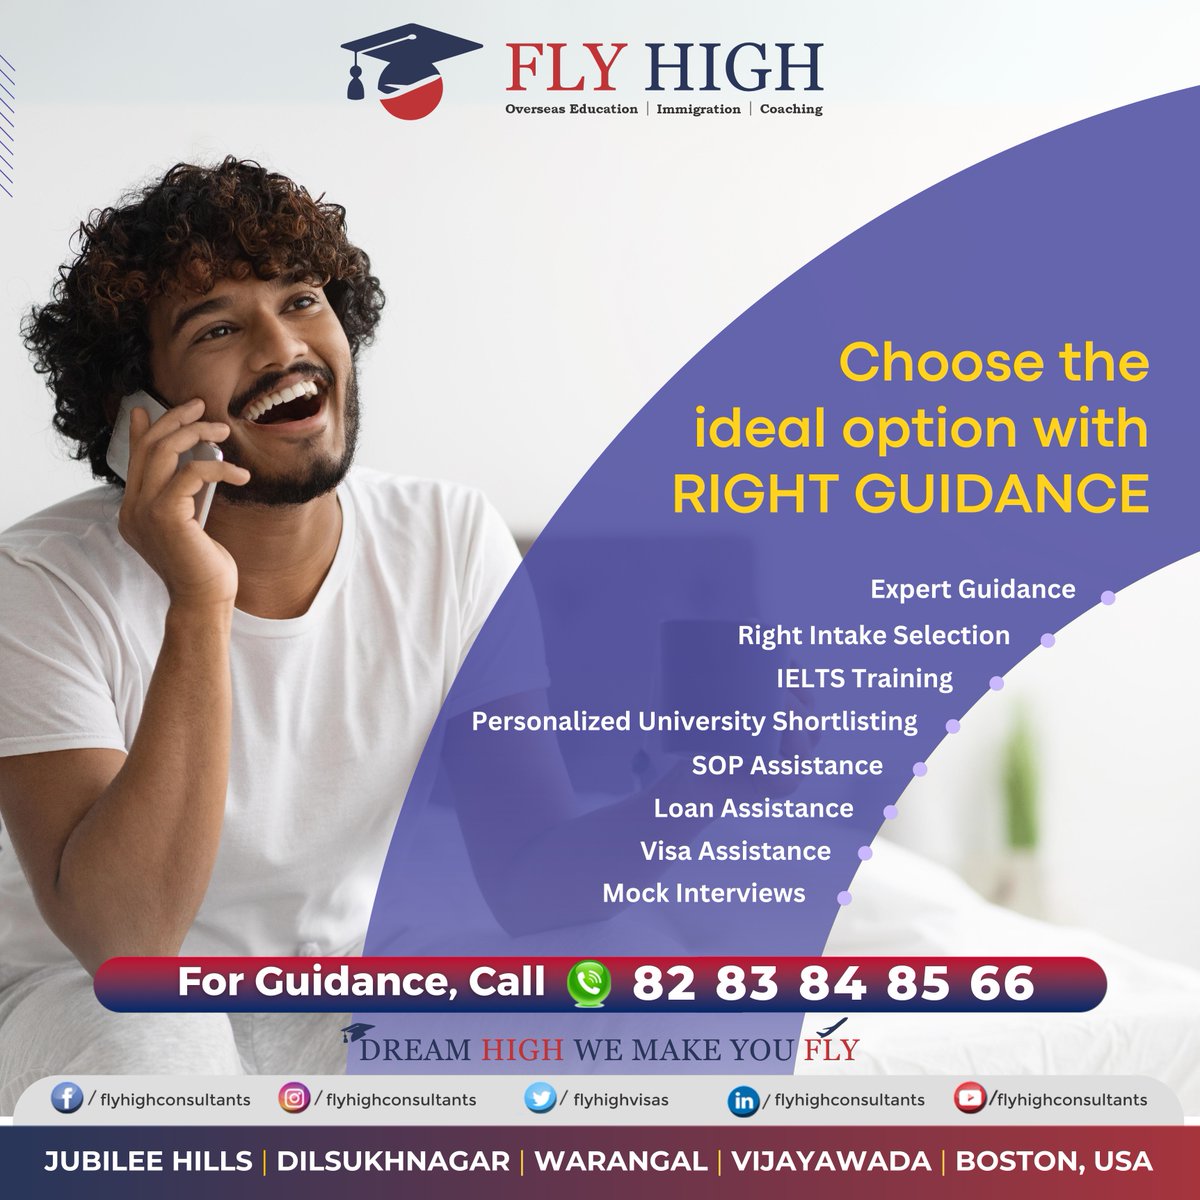 #StudyingAbroad Simplified..!!
Choose an ideal option with right guidance. It's your time to shine and take control of your future.
Our expert counselor is here to guide you every step of the way. Book your counseling session today.
Contact us @ 8283848566
#flyhighconsultants